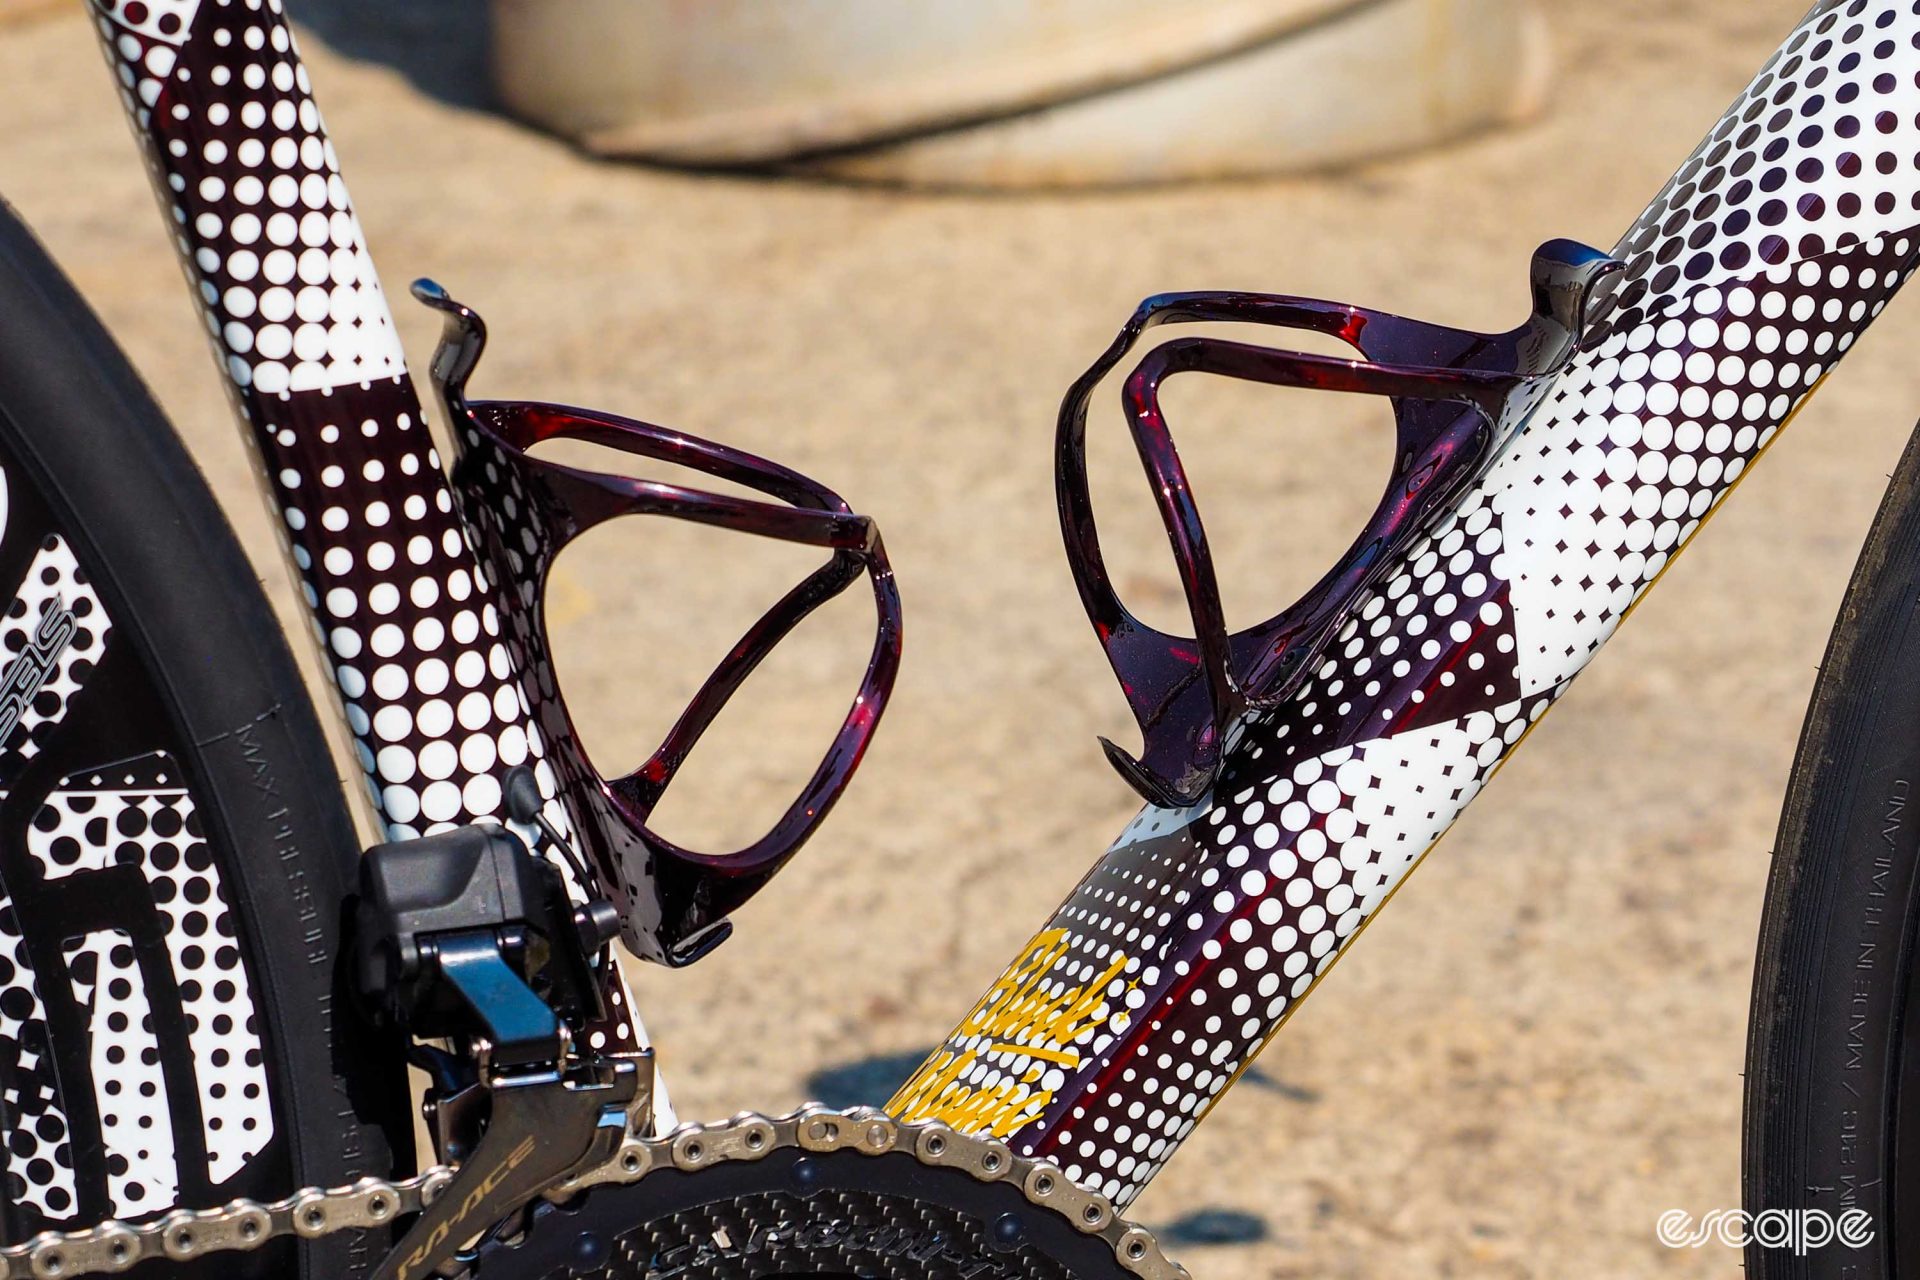 Detail shot of bottle cages, also finished with the red-tinted clearcoat (but no dots).